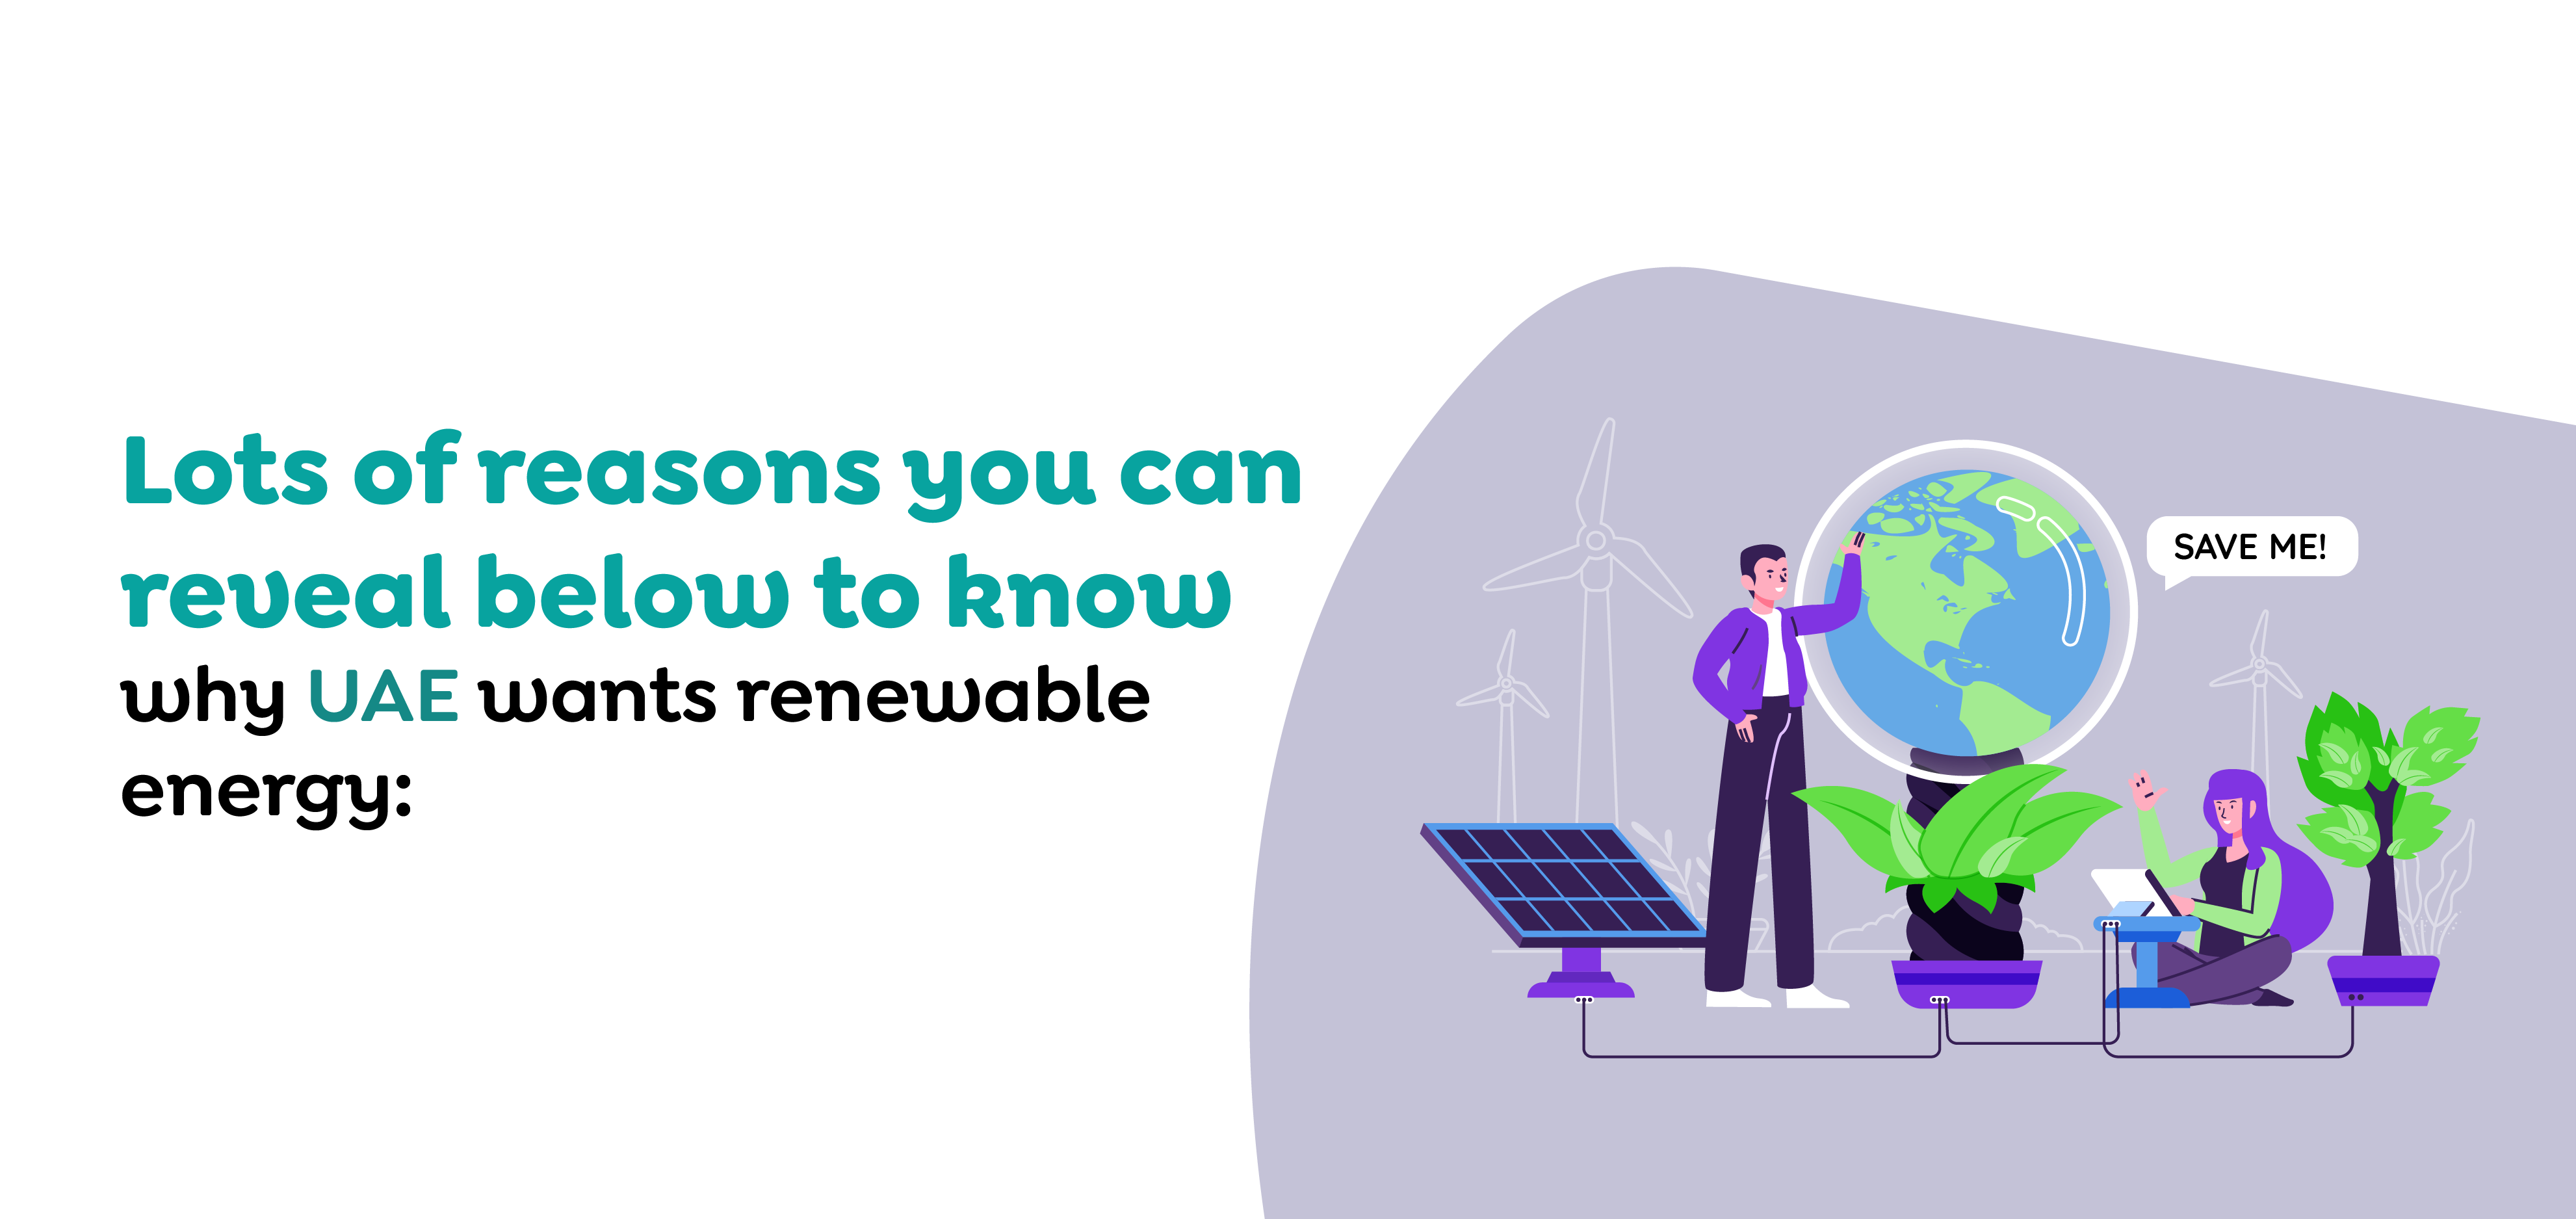 Lots of reasons you can reveal below to know why UAE wants renewable energy